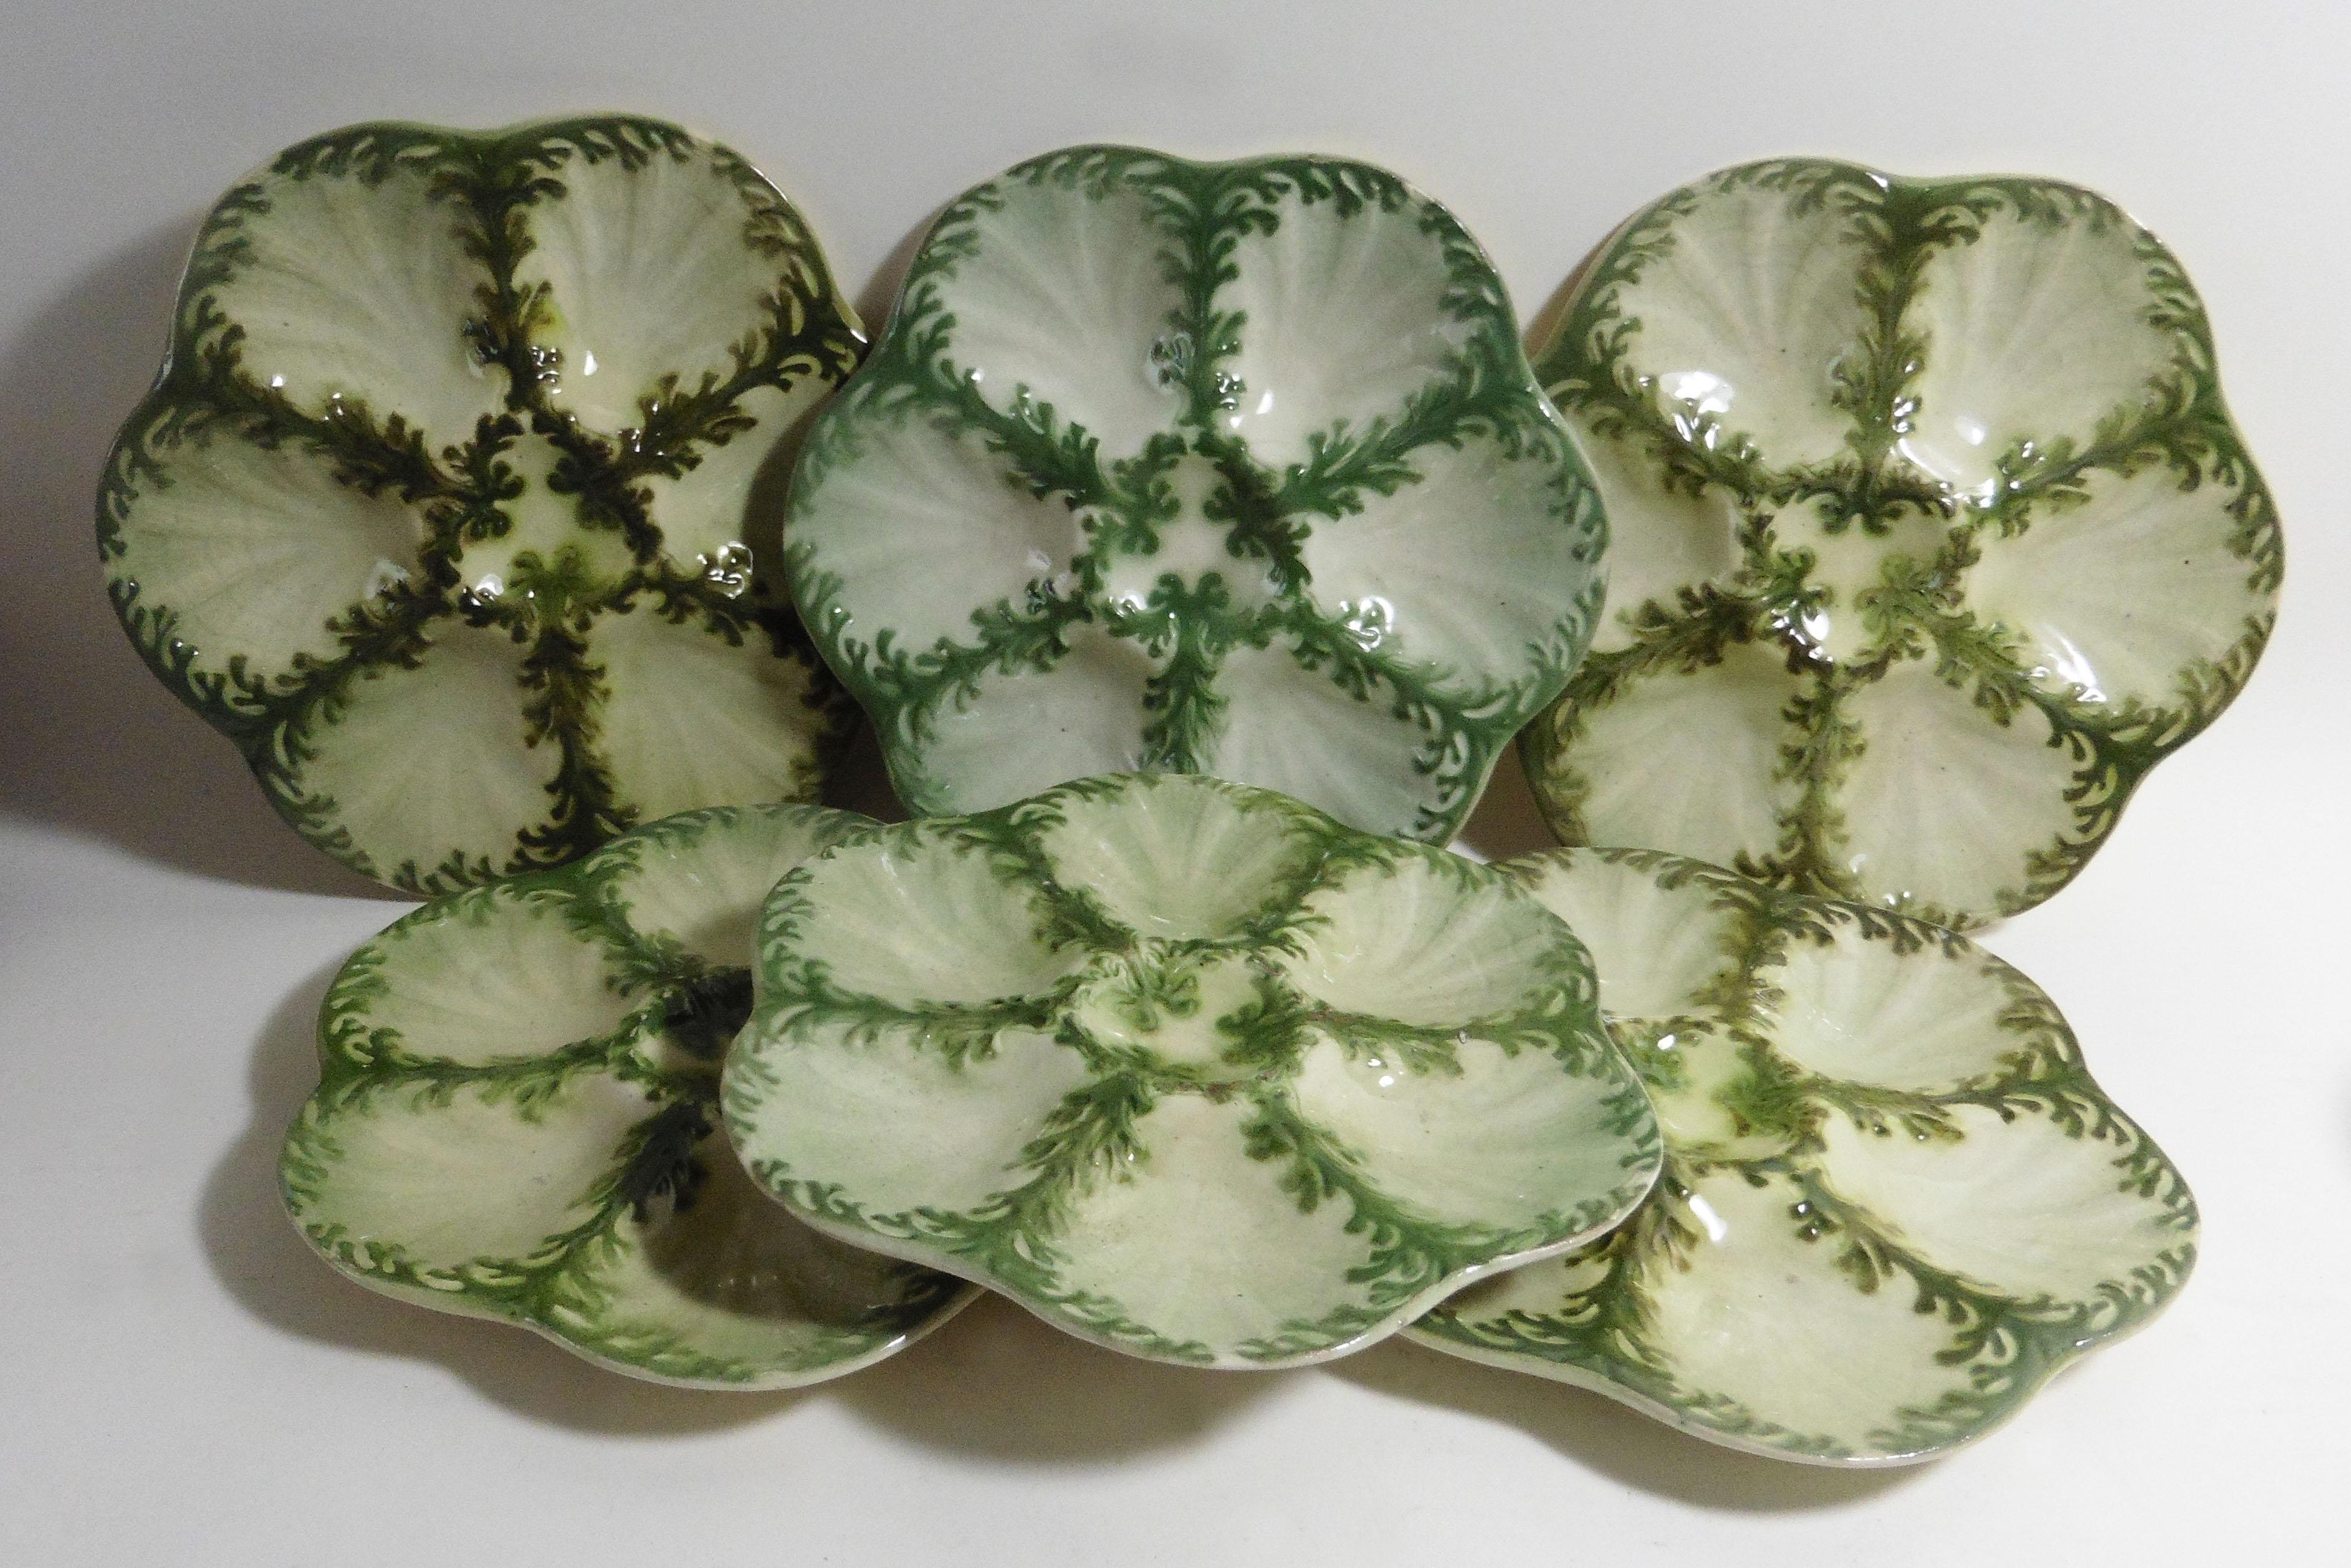 Ceramic Majolica Seaweeds Oyster Plate Keller and Guerin Saint Clement, circa 1890